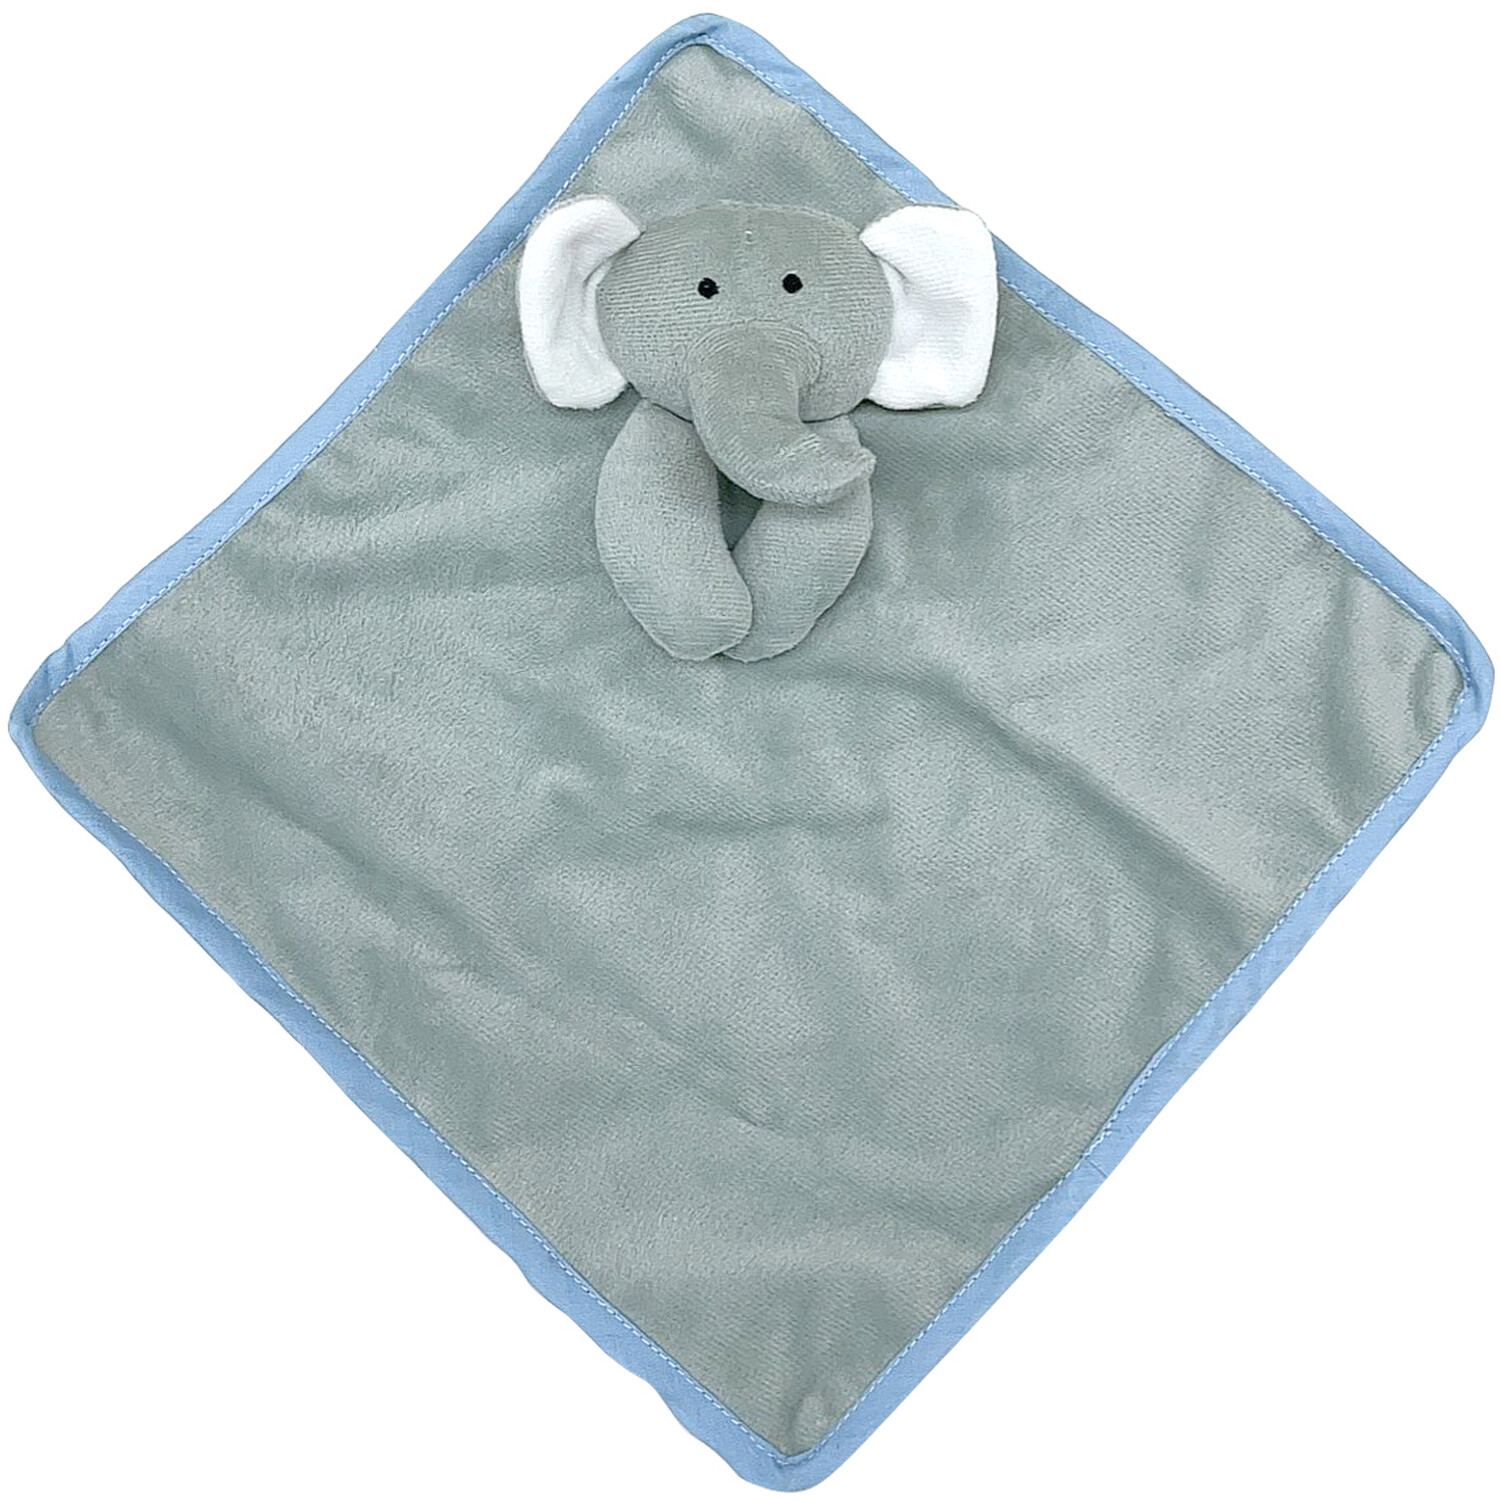 Clever Paws Comforter Grey Elephant Dog Toy Image 1